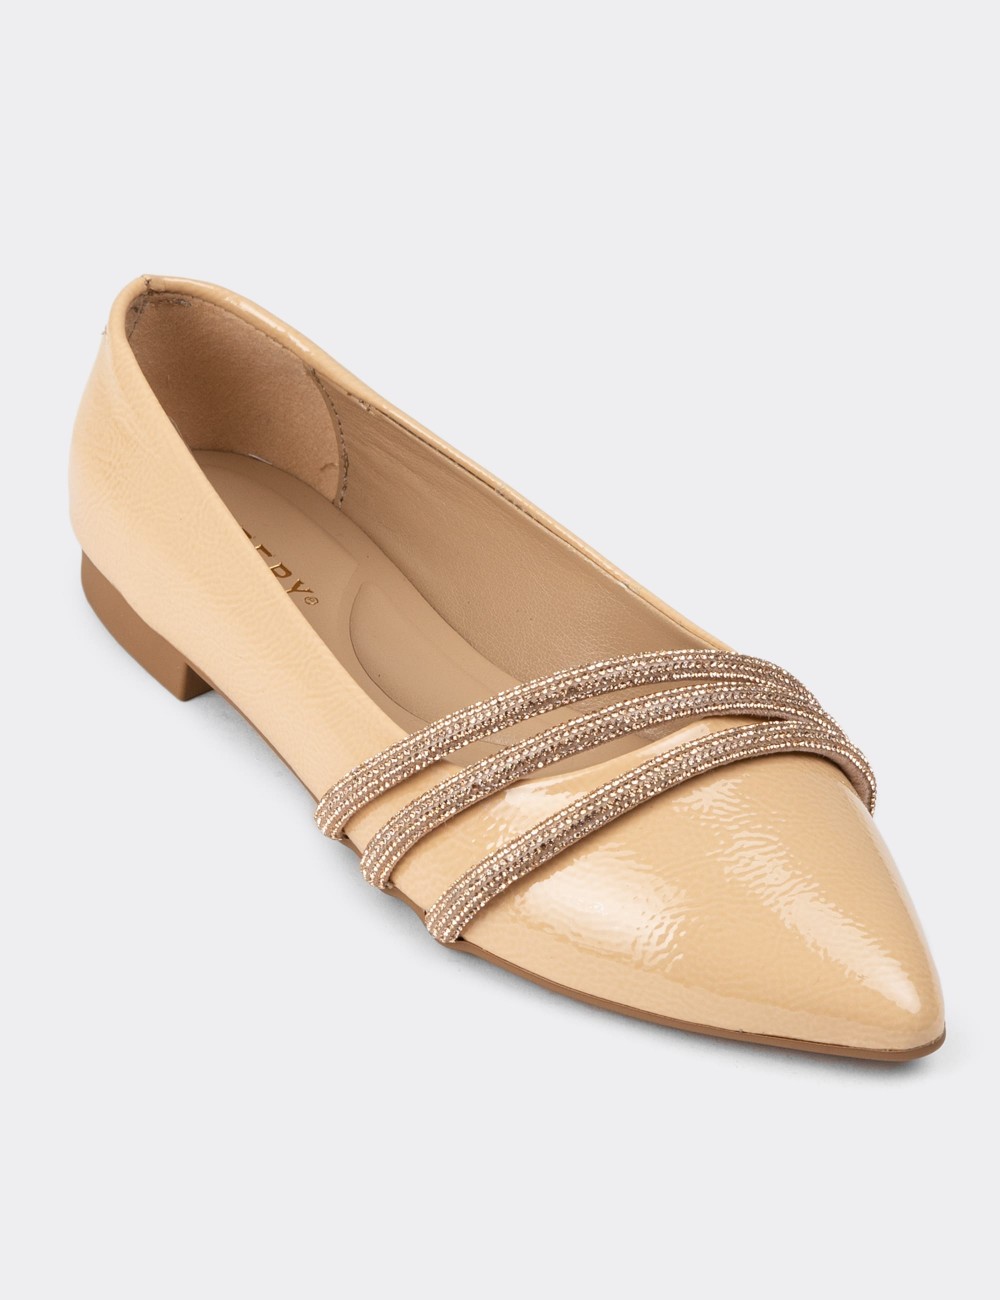 Camel Patent Loafers - 38601ZCMLC01